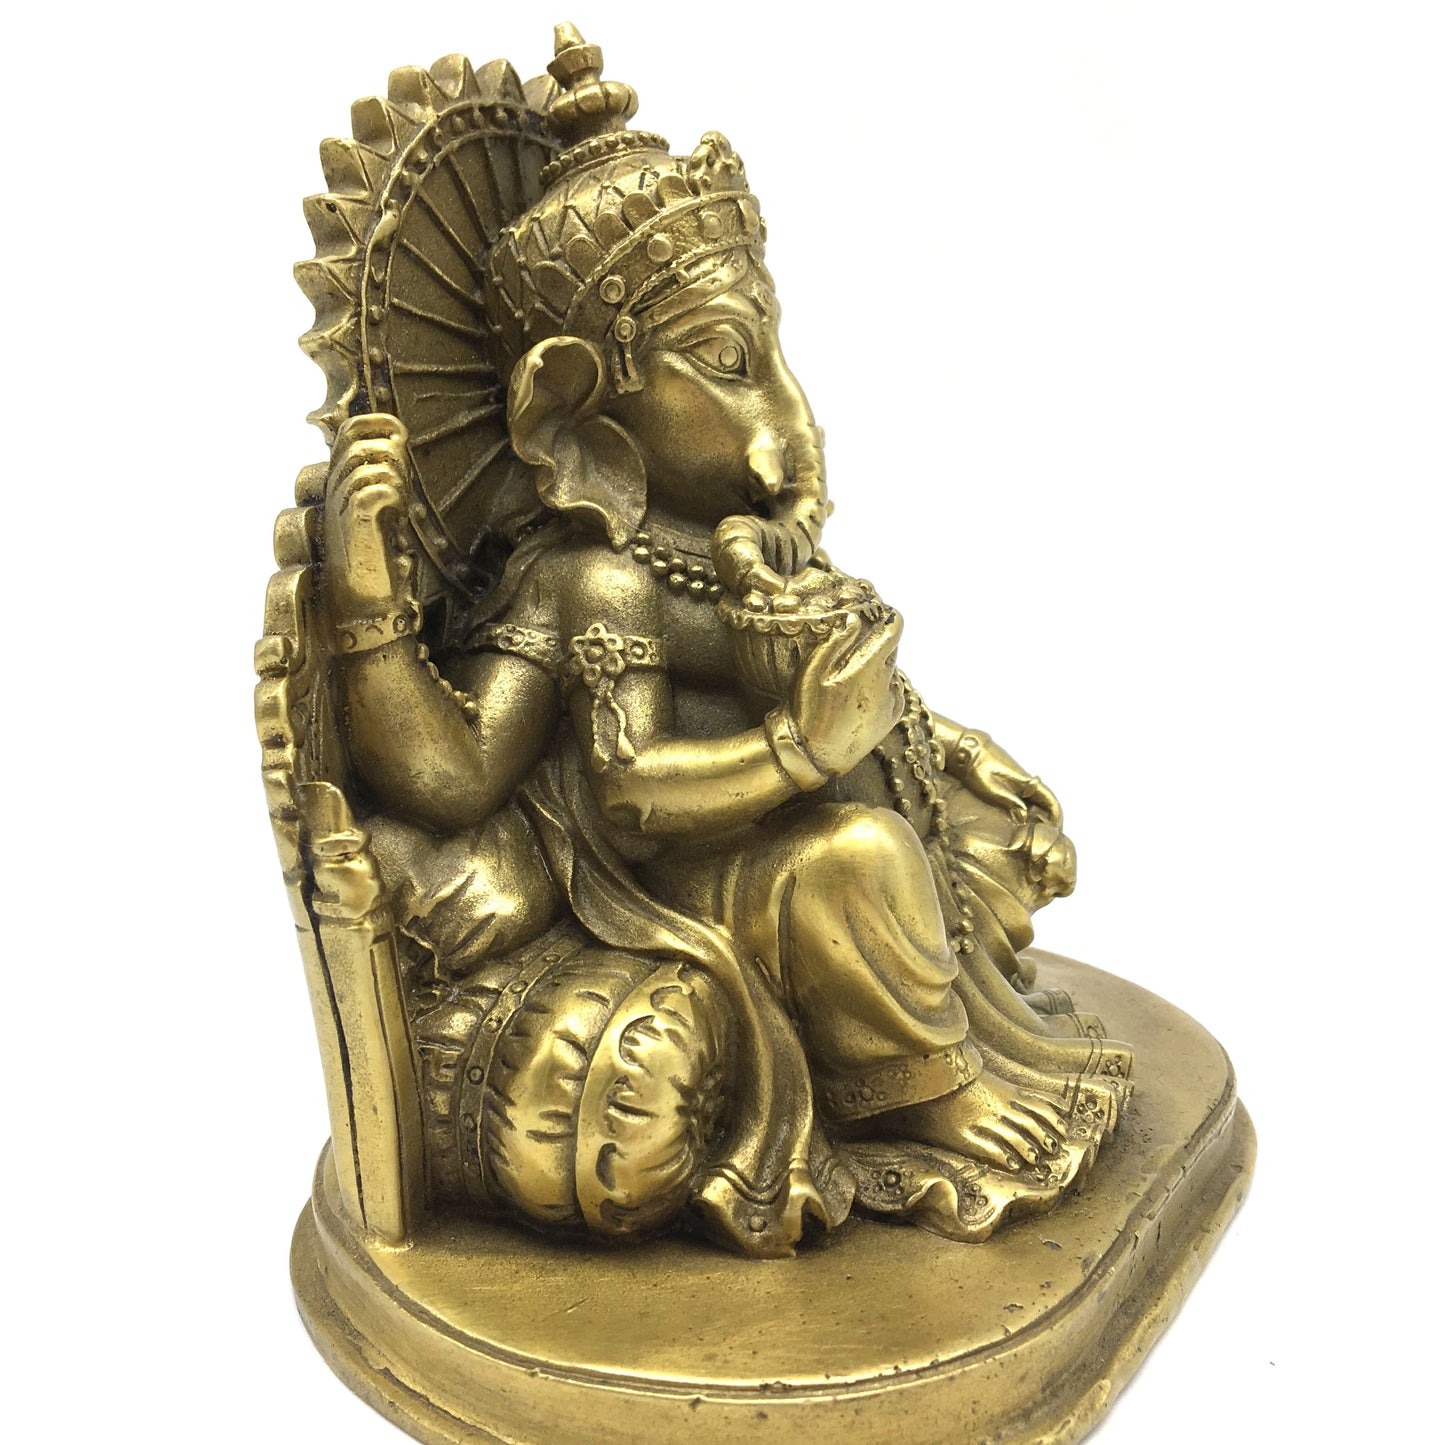 Handmade Brass Ganapati Ganesh India Elephant God Obstacle Remover Statue